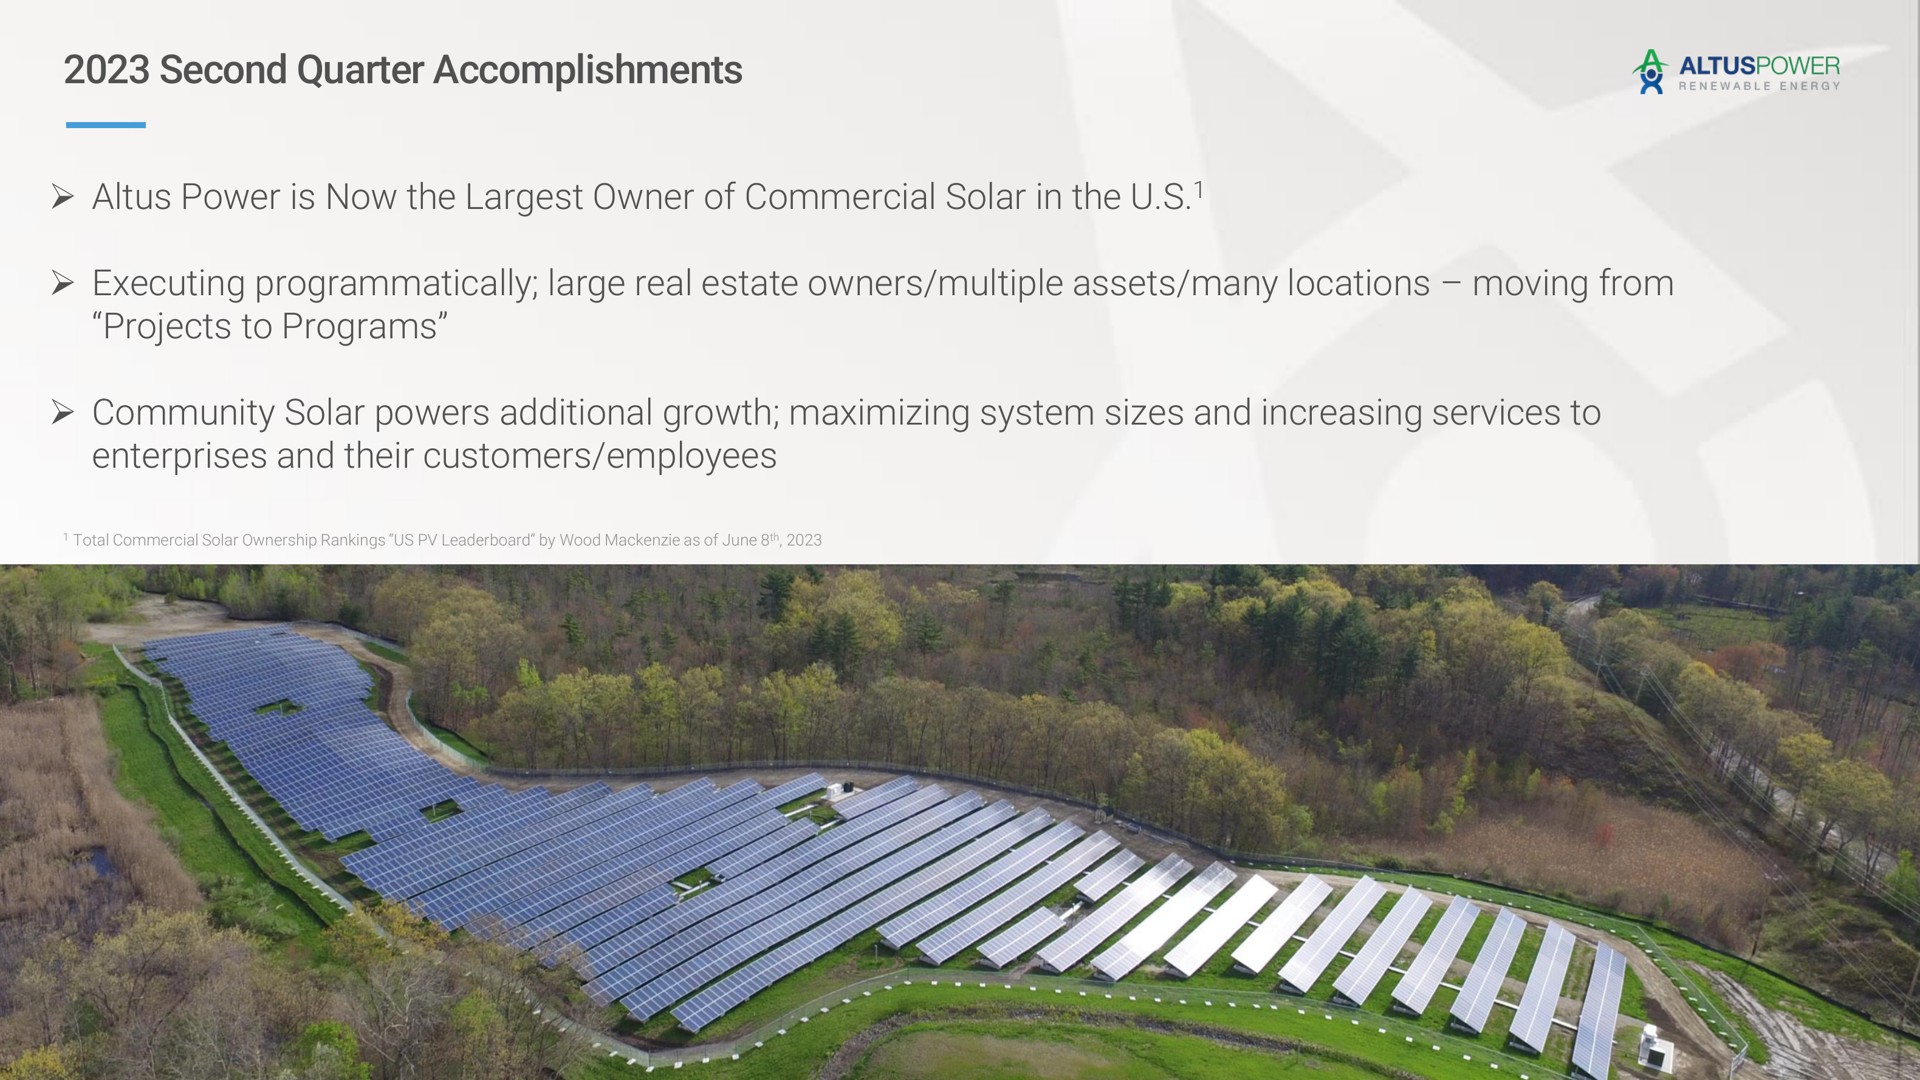 second quarter accomplishments power is now the owner of commercial solar in the executing programmatically large real estate owners multiple assets many locations moving from projects to programs community solar powers additional growth maximizing system sizes and increasing services to enterprises and their customers employees | Altus Power